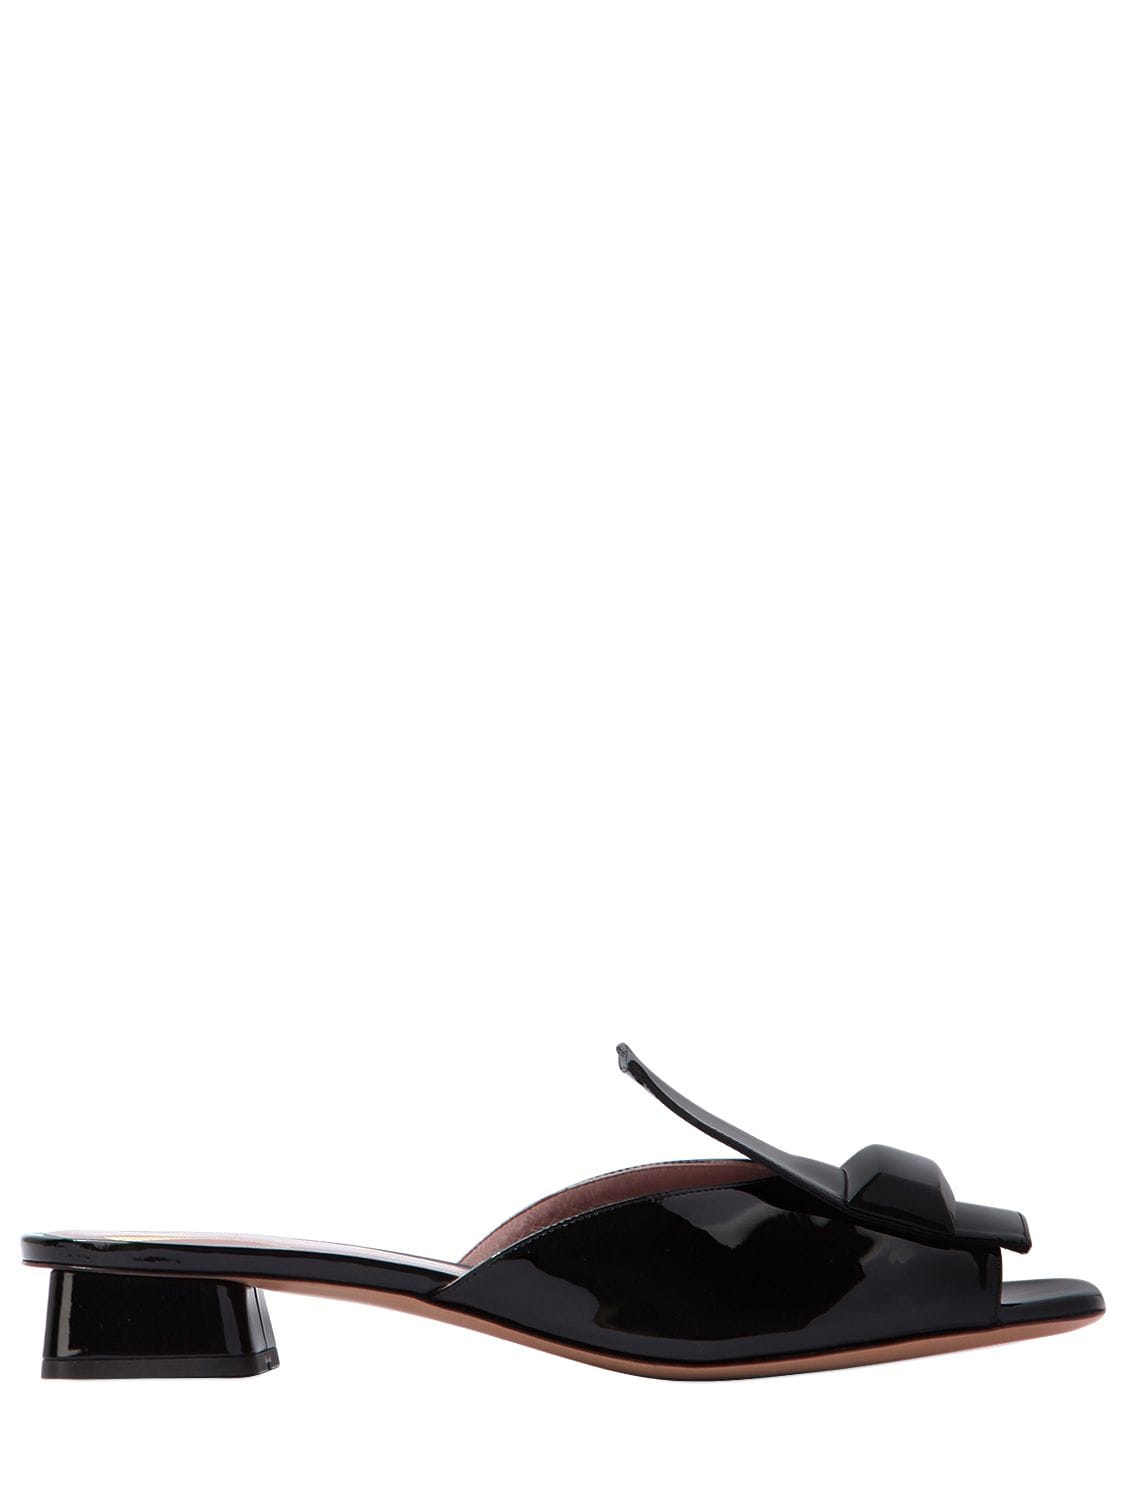 Rayne 30mm Patent Leather Sandals In Black